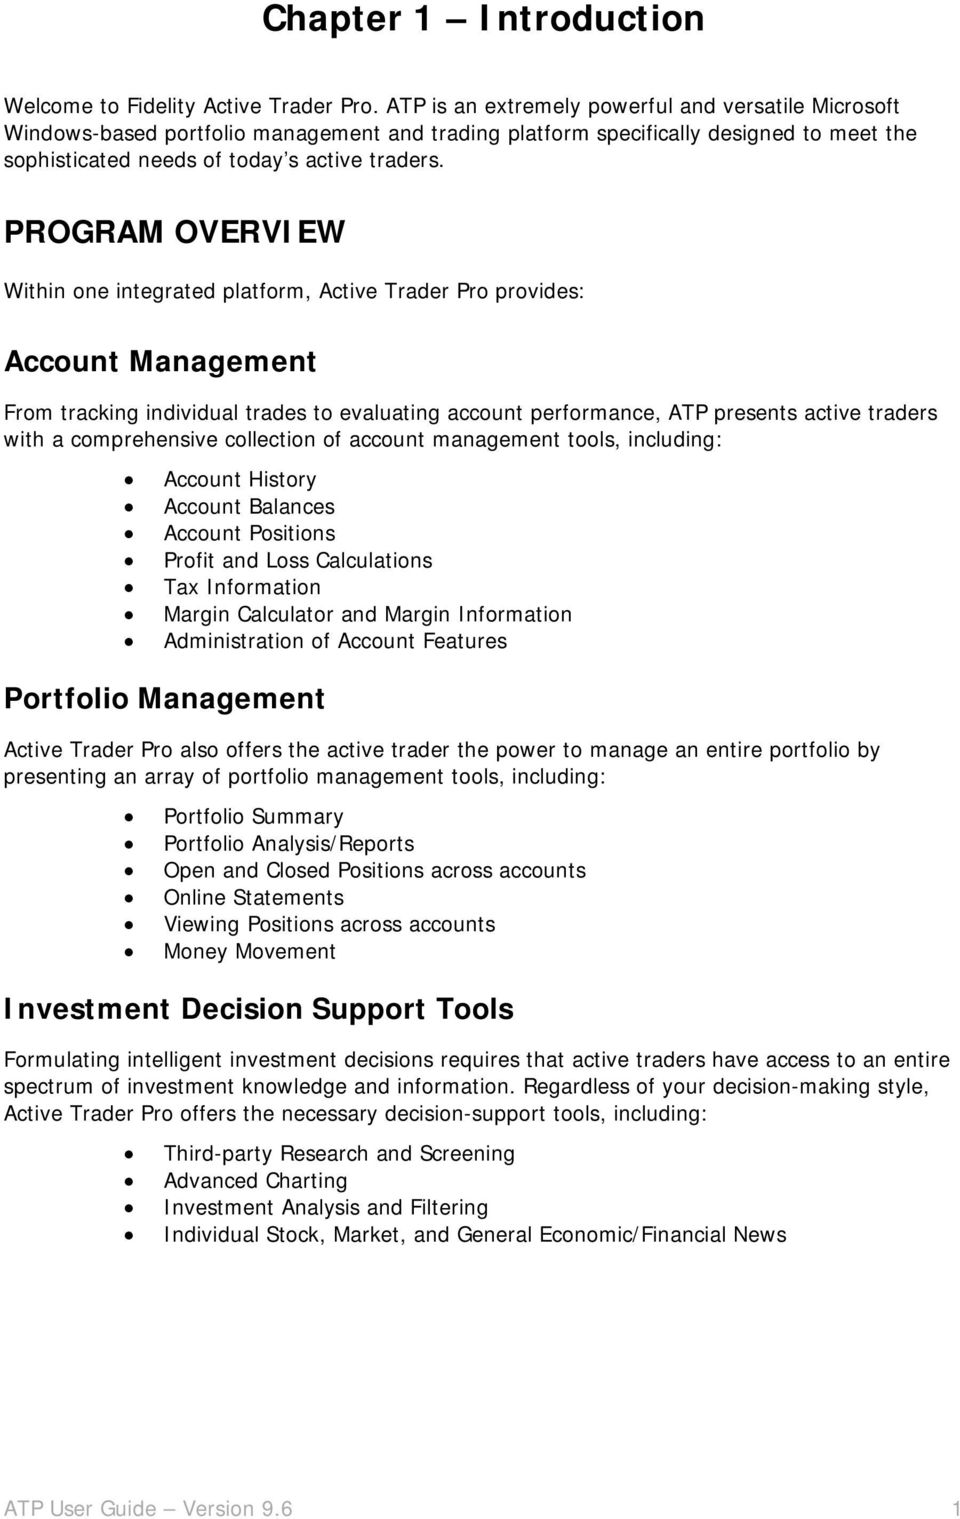 PROGRAM OVERVIEW Within one integrated platform, Active Trader Pro provides: Account Management From tracking individual trades to evaluating account performance, ATP presents active traders with a